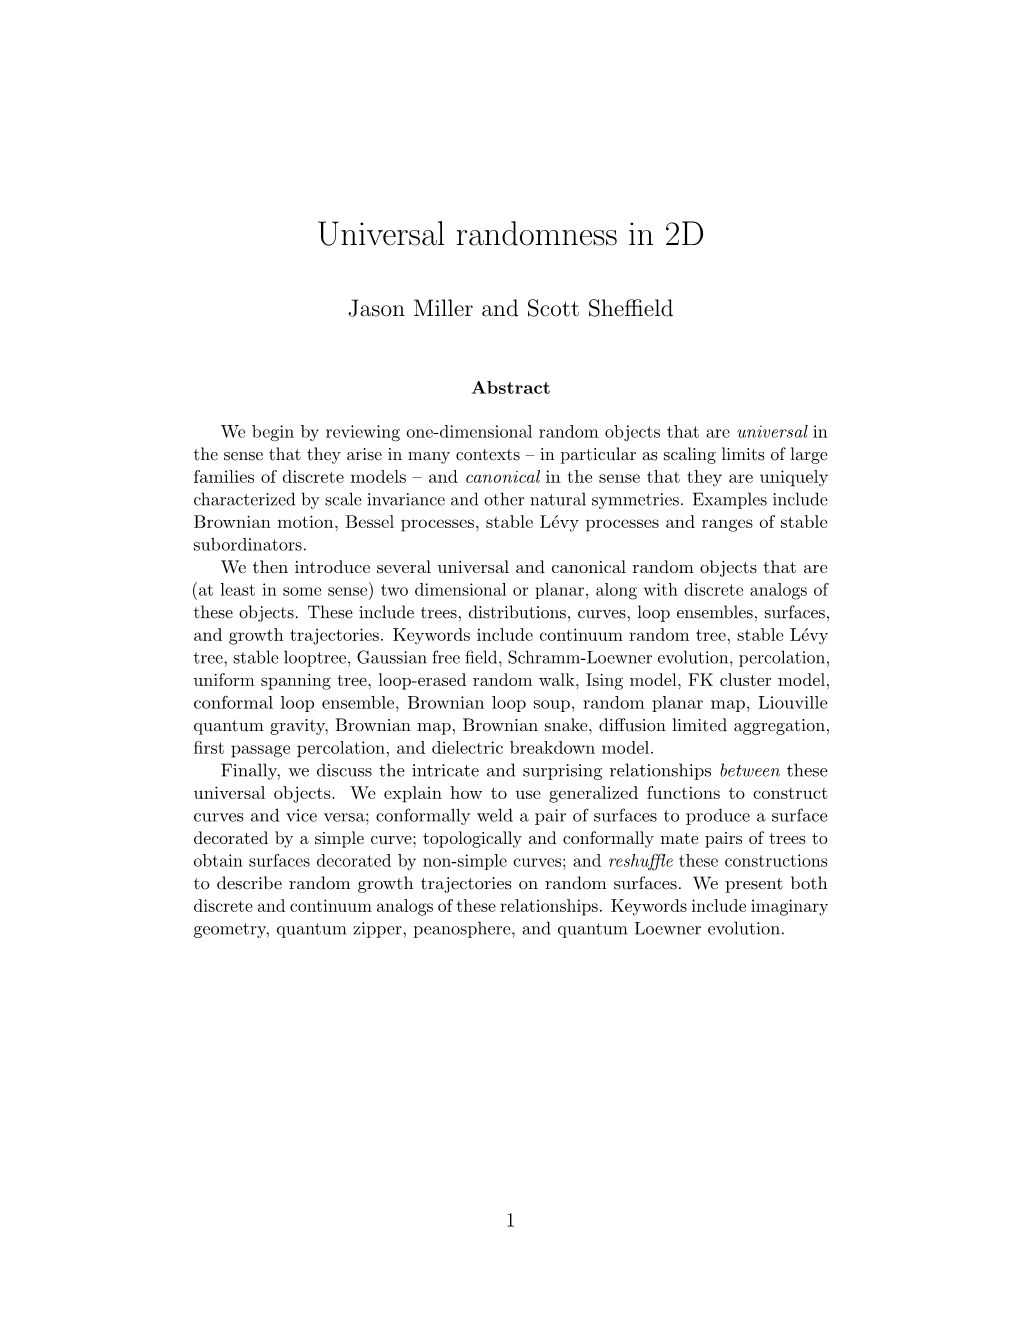 Lecture Notes for Universal Random Structures in 2D